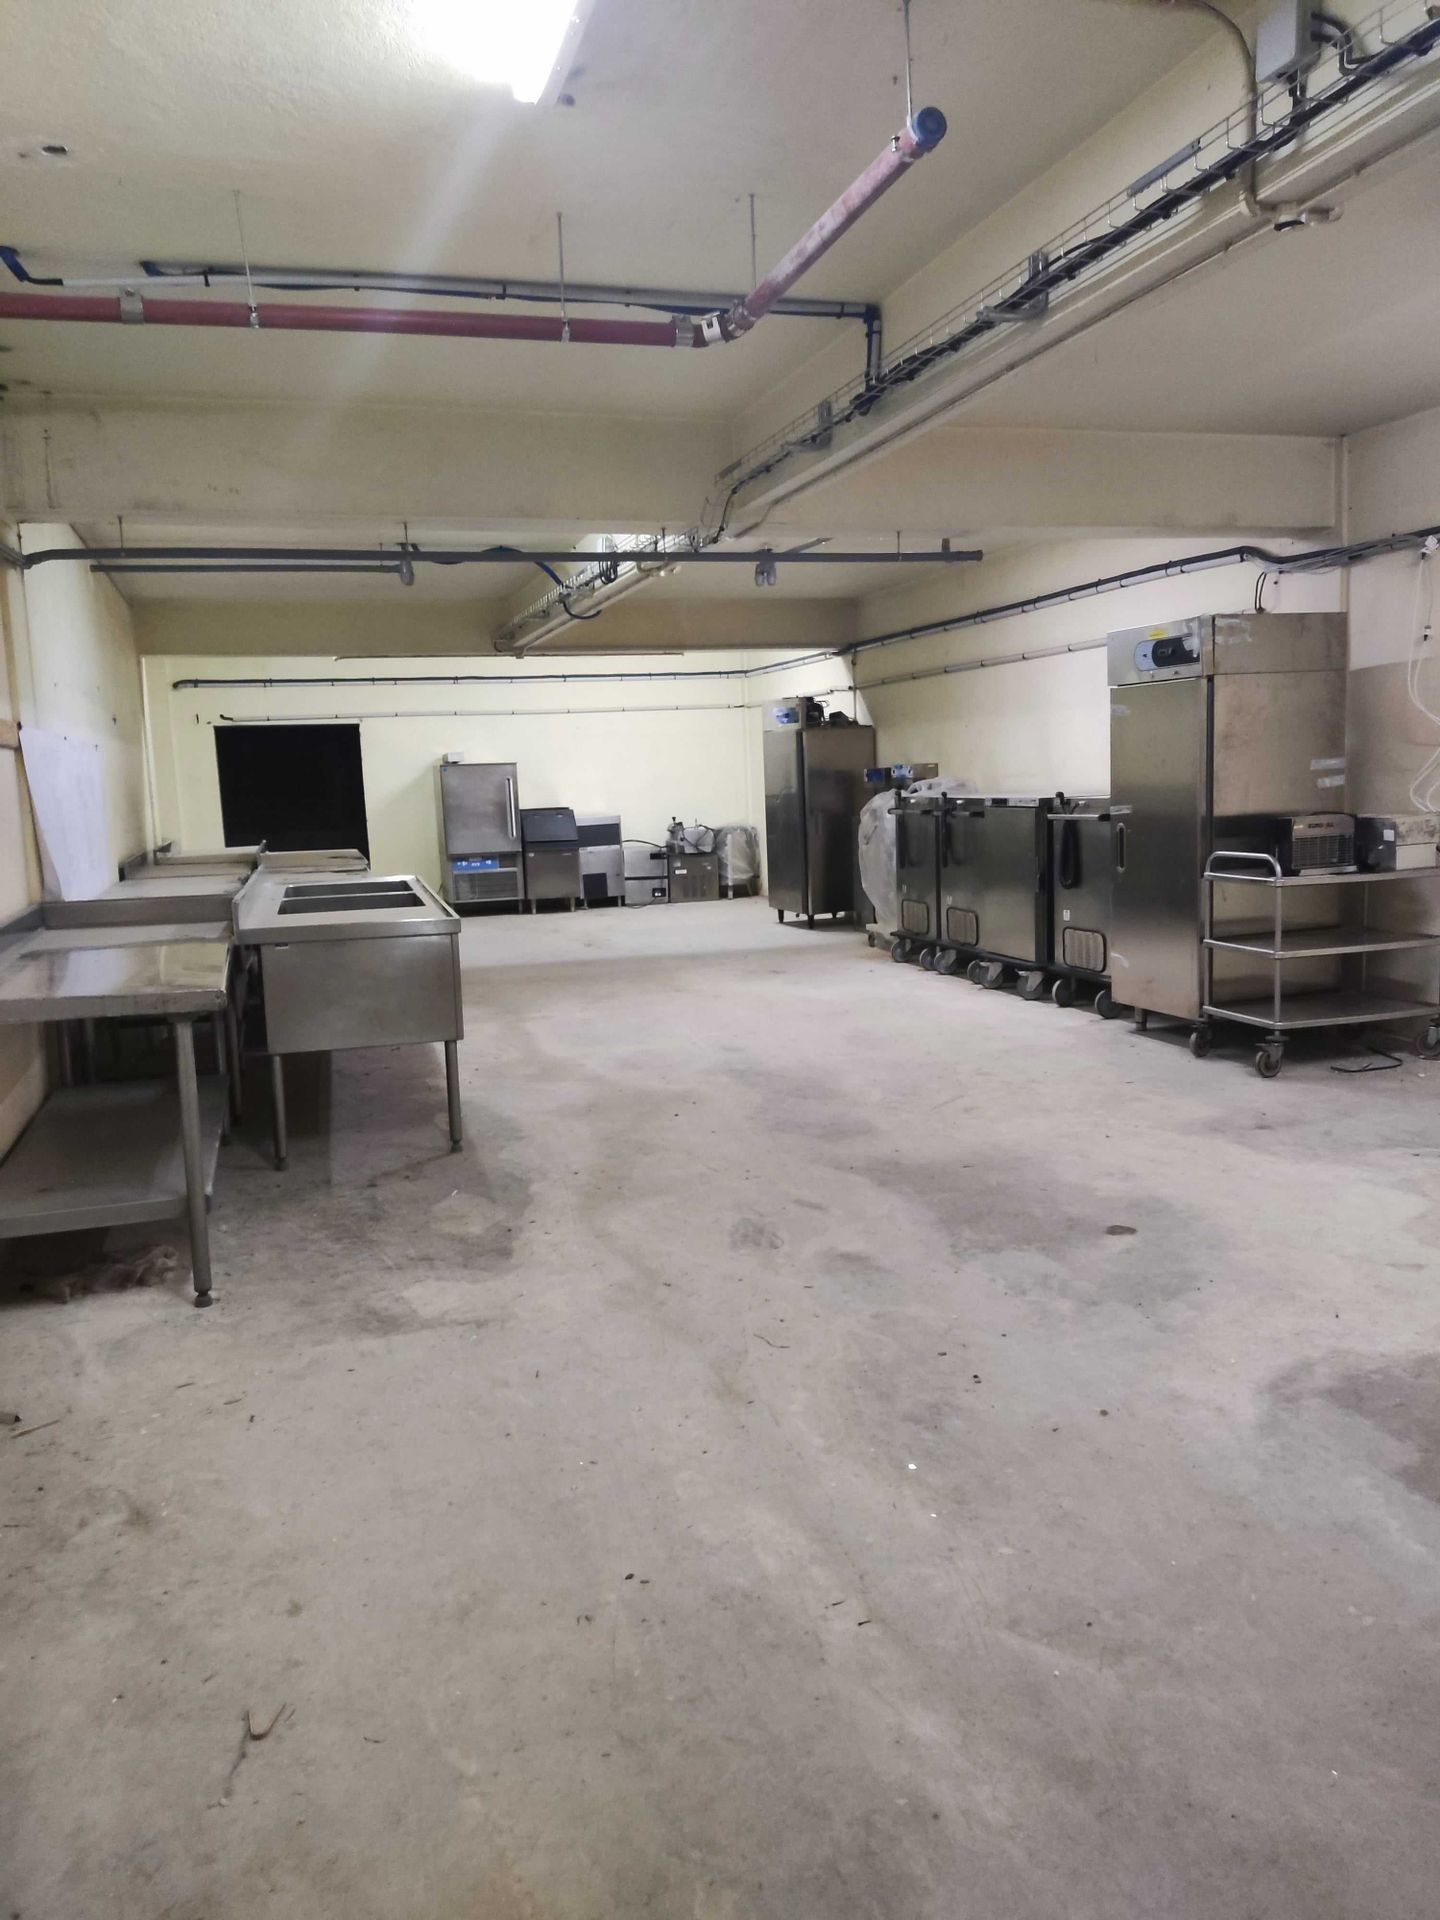 Null [RP] Reserved for professionals.
Set of catering equipment mainly in stainl&hellip;